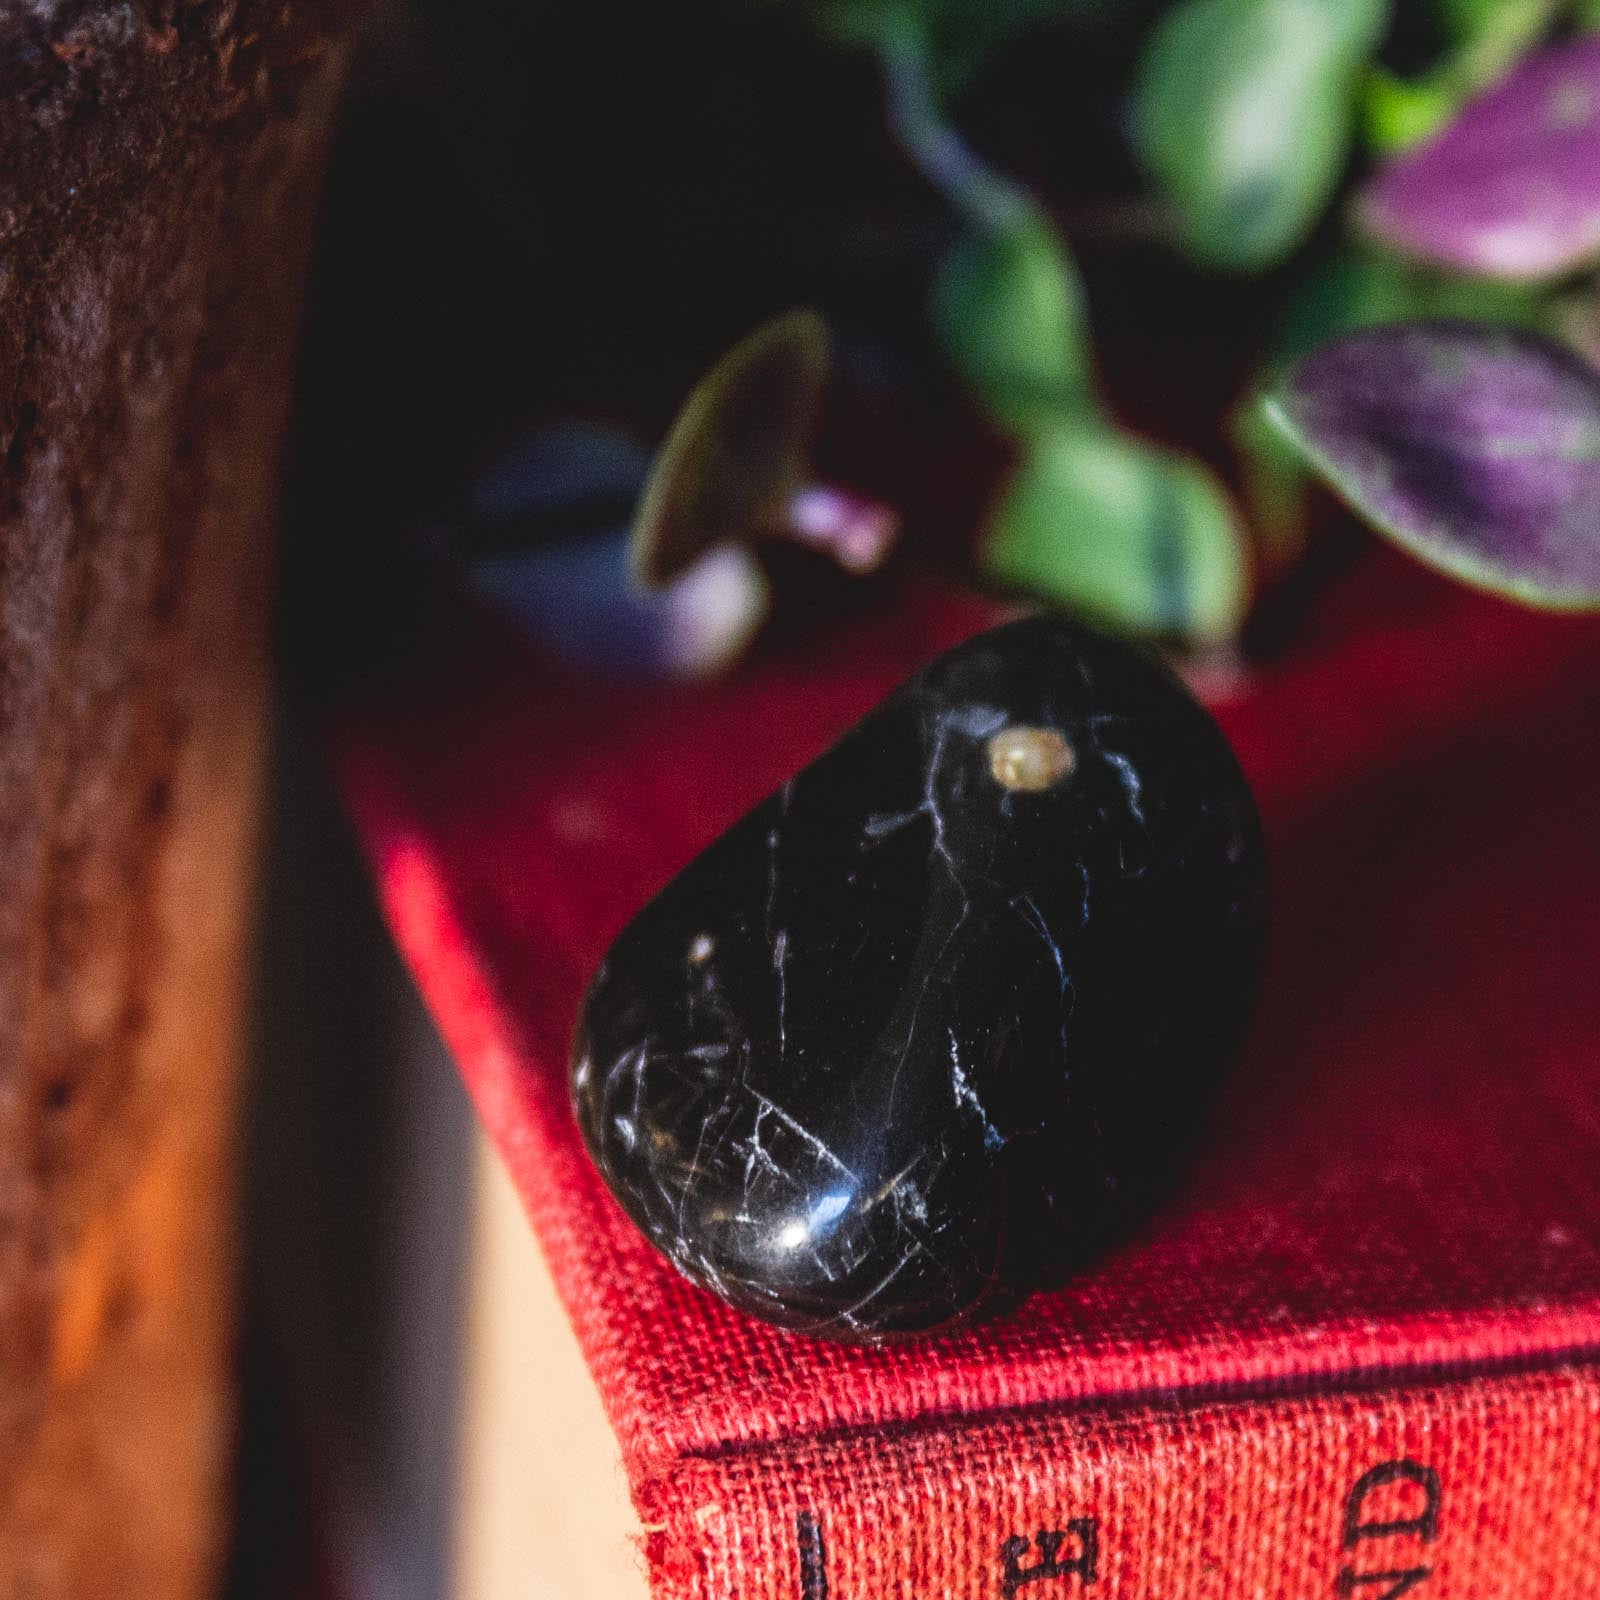 Ethical Black Tourmaline Healing Crystal for Protection, Grounding, and Balancing